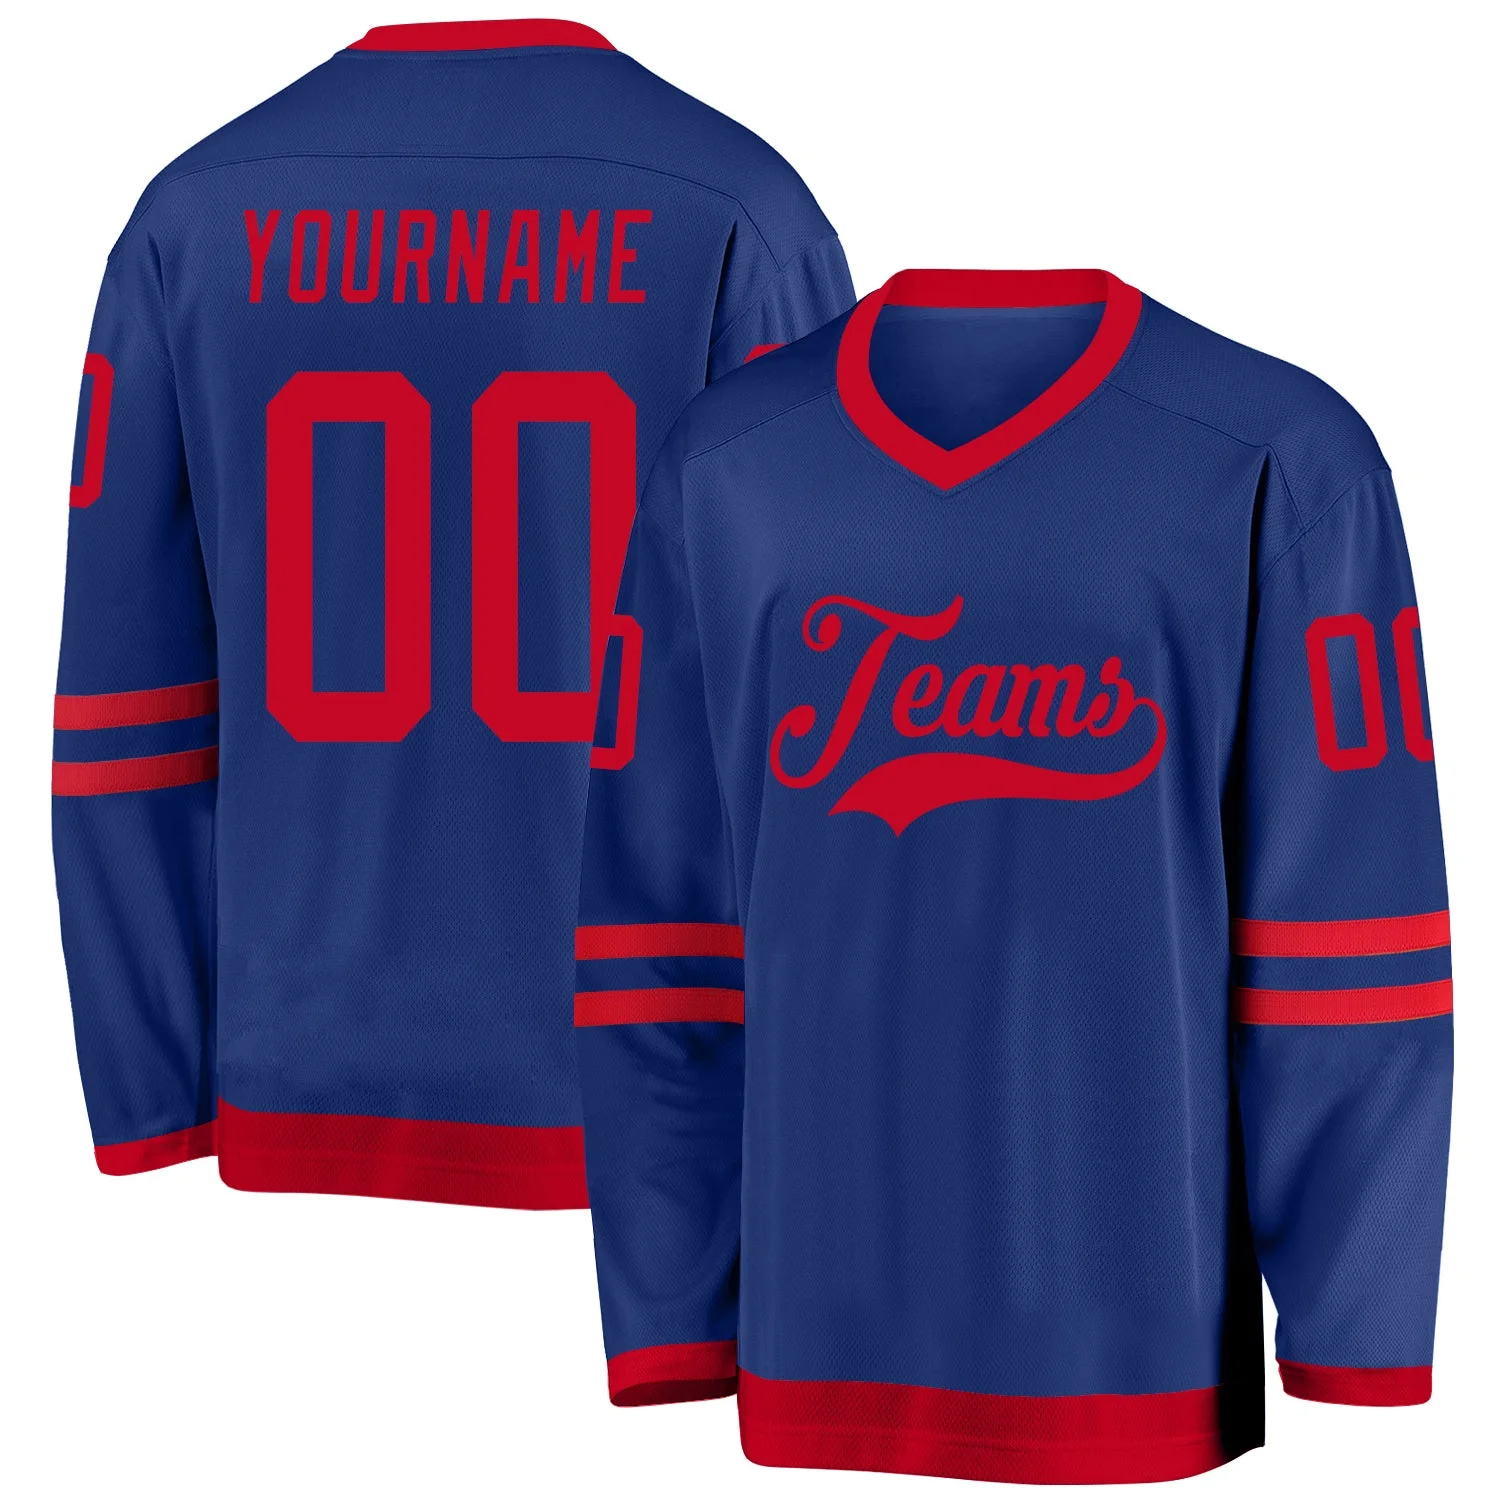 Stitched And Print Royal Red Hockey Jersey Custom